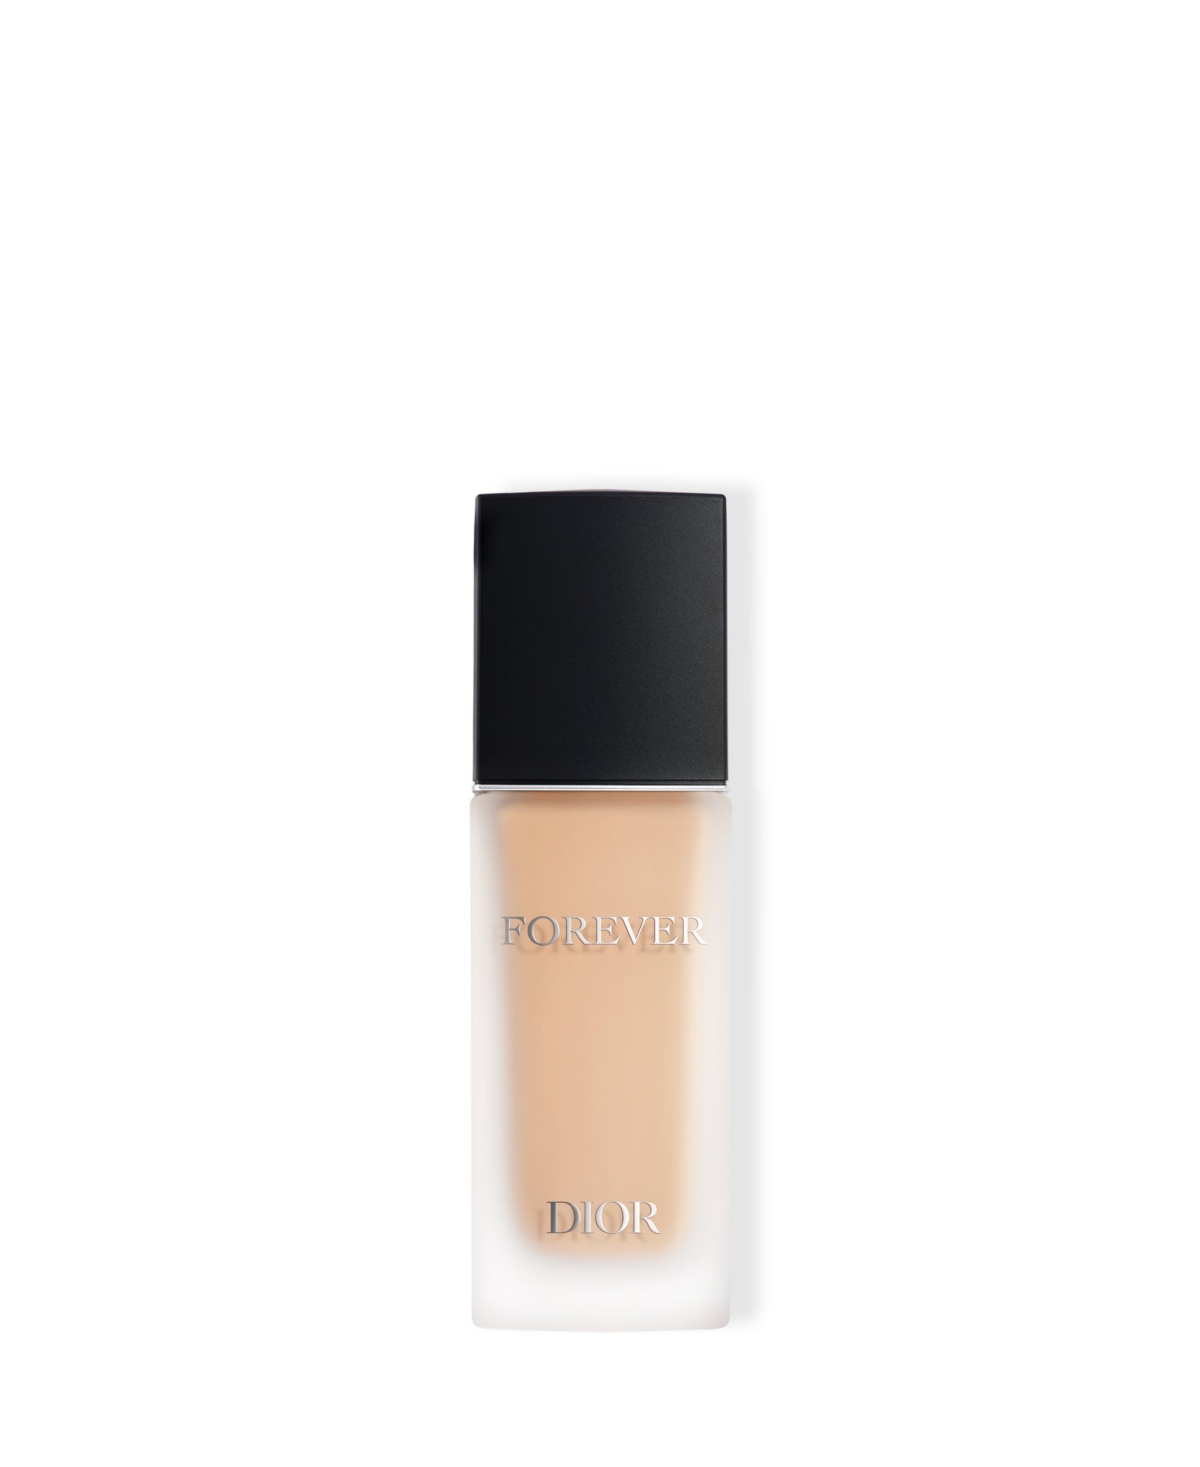 Dior Forever Matte Skincare Foundation Spf 15 In Neutral (fair Skin With Neutral Tones)